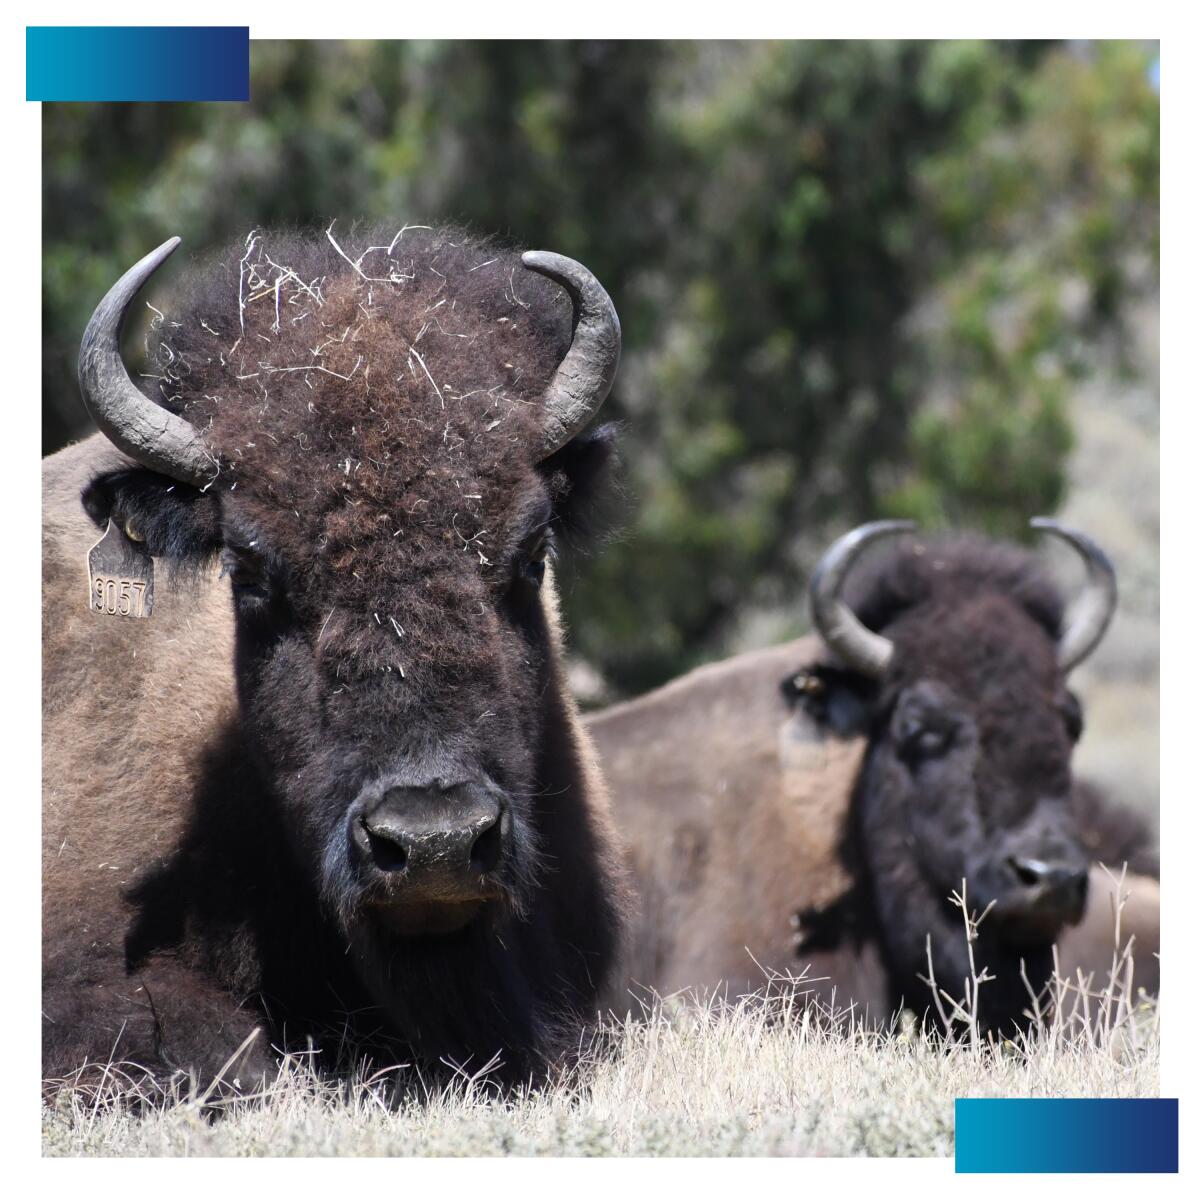 More bison will be joining Catalina Island's herd.